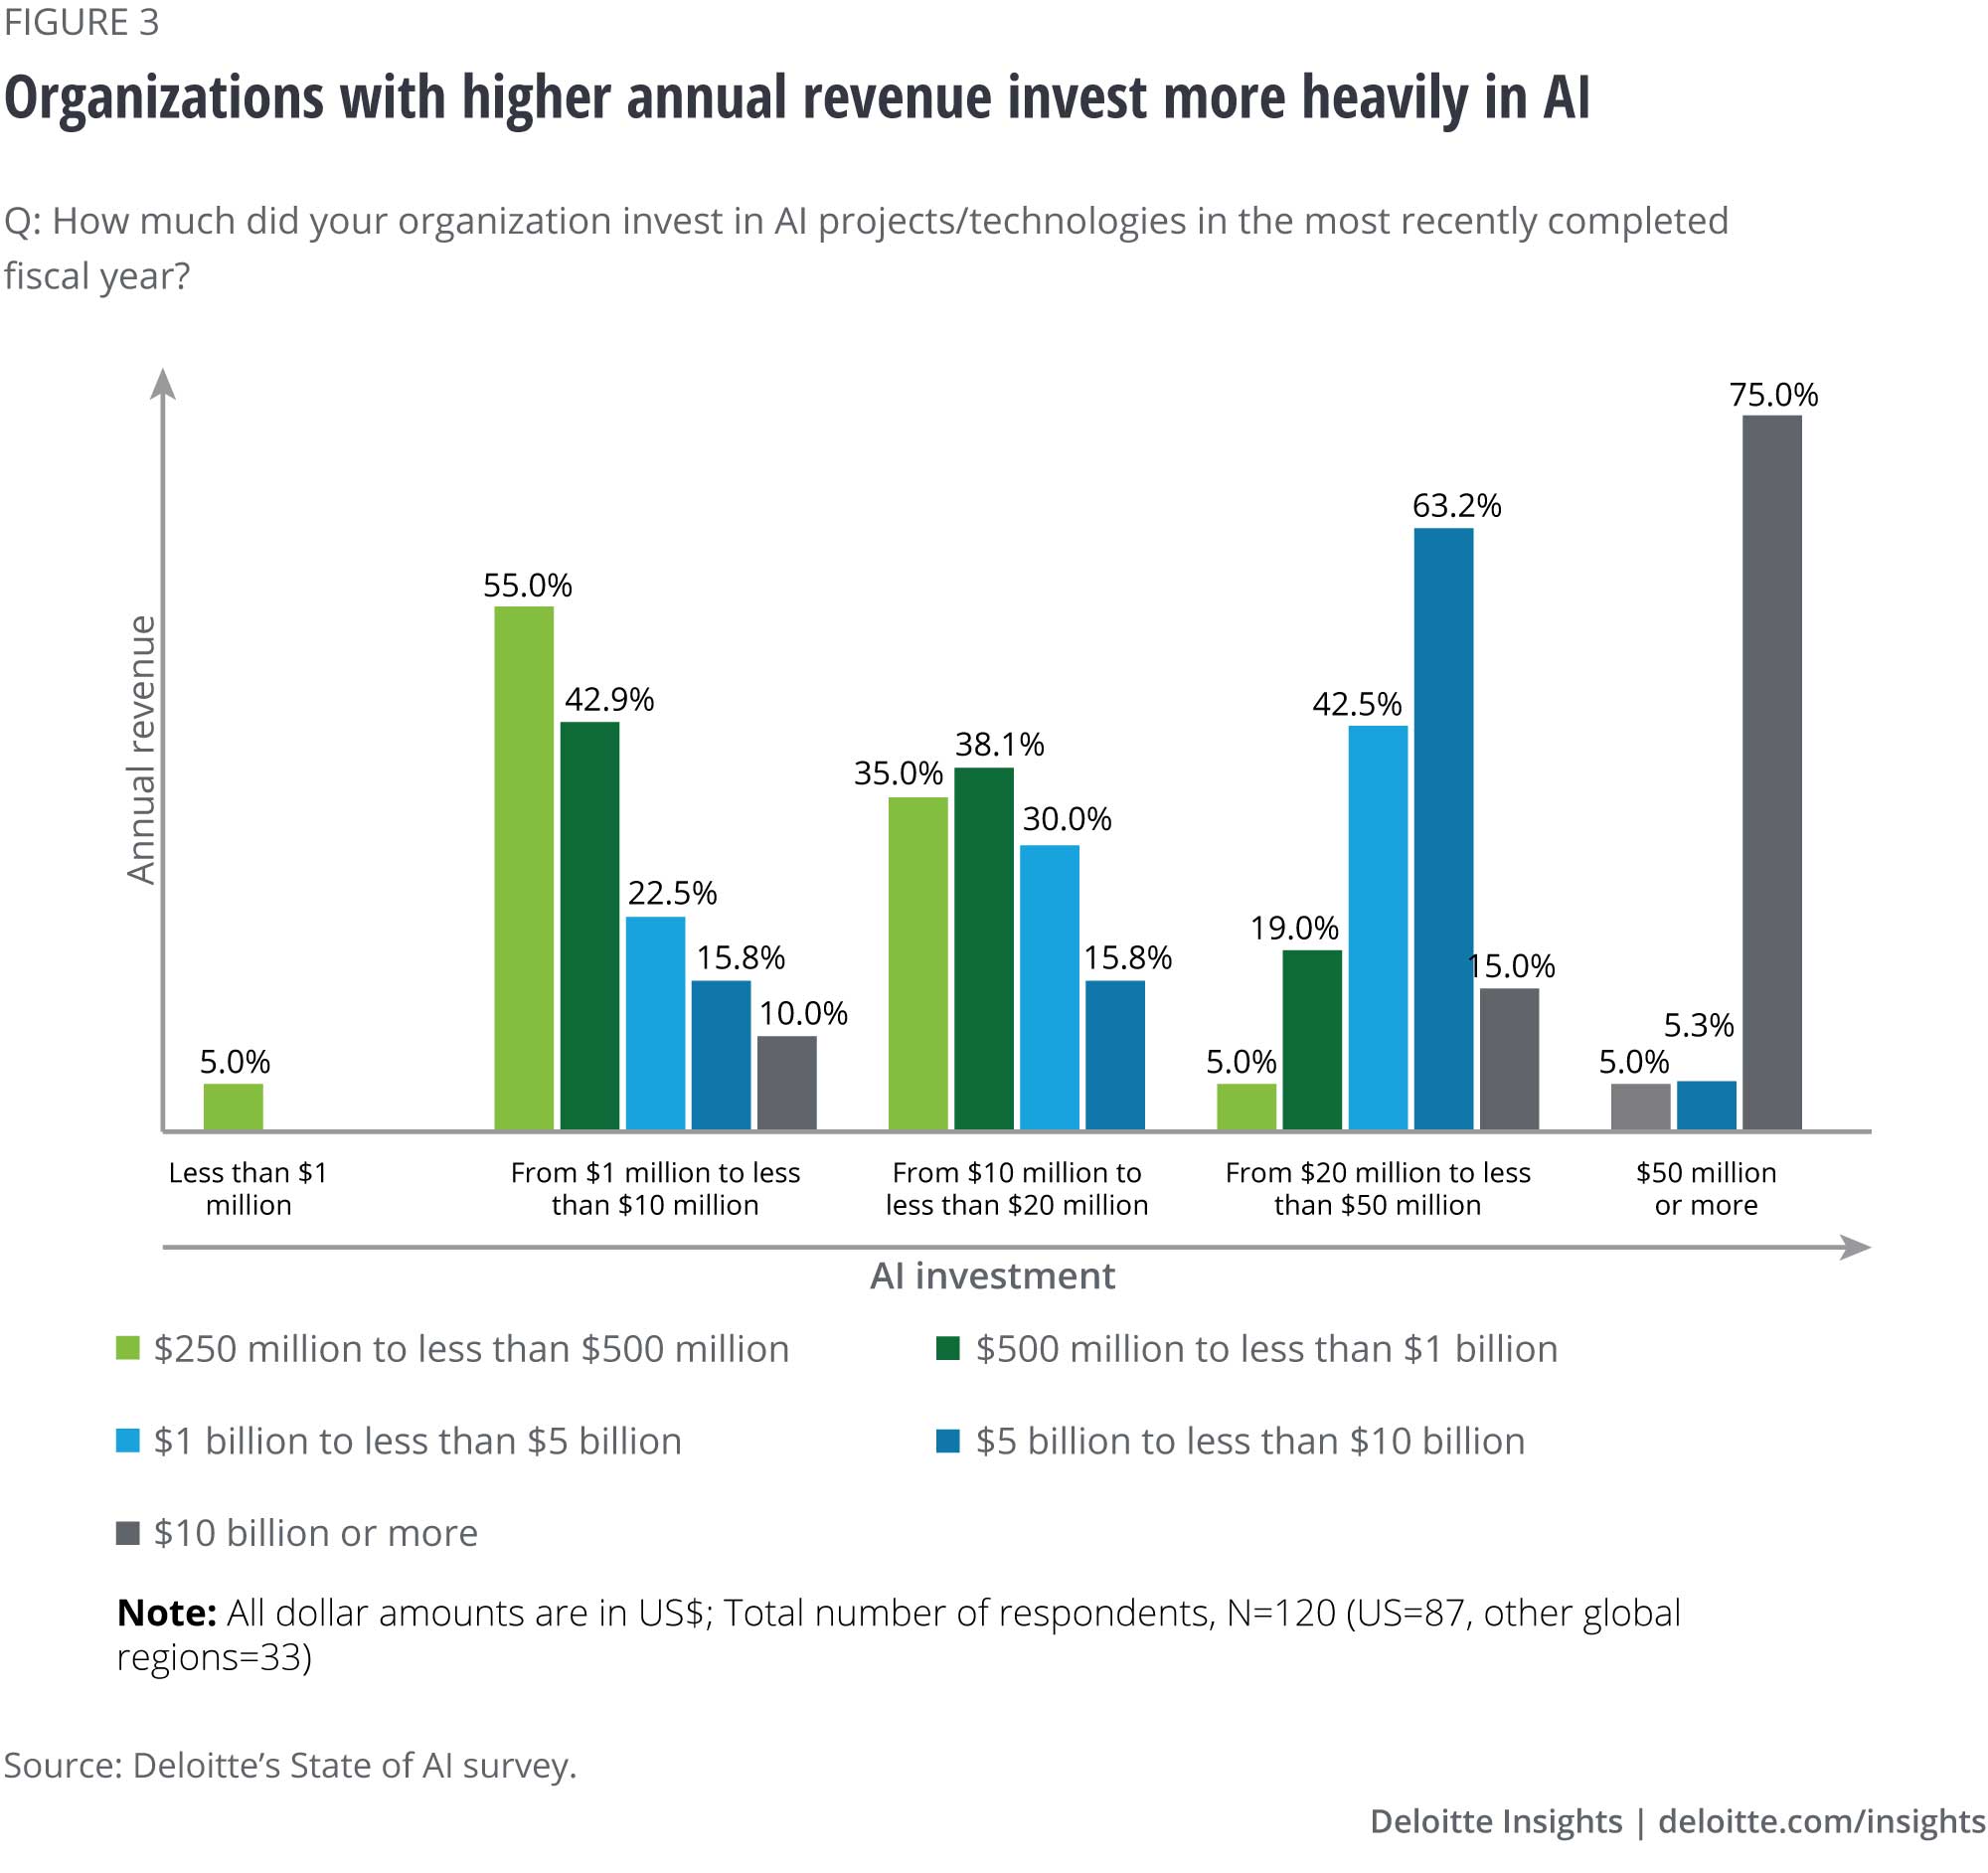 Organizations with higher annual revenue invest more heavily in AI